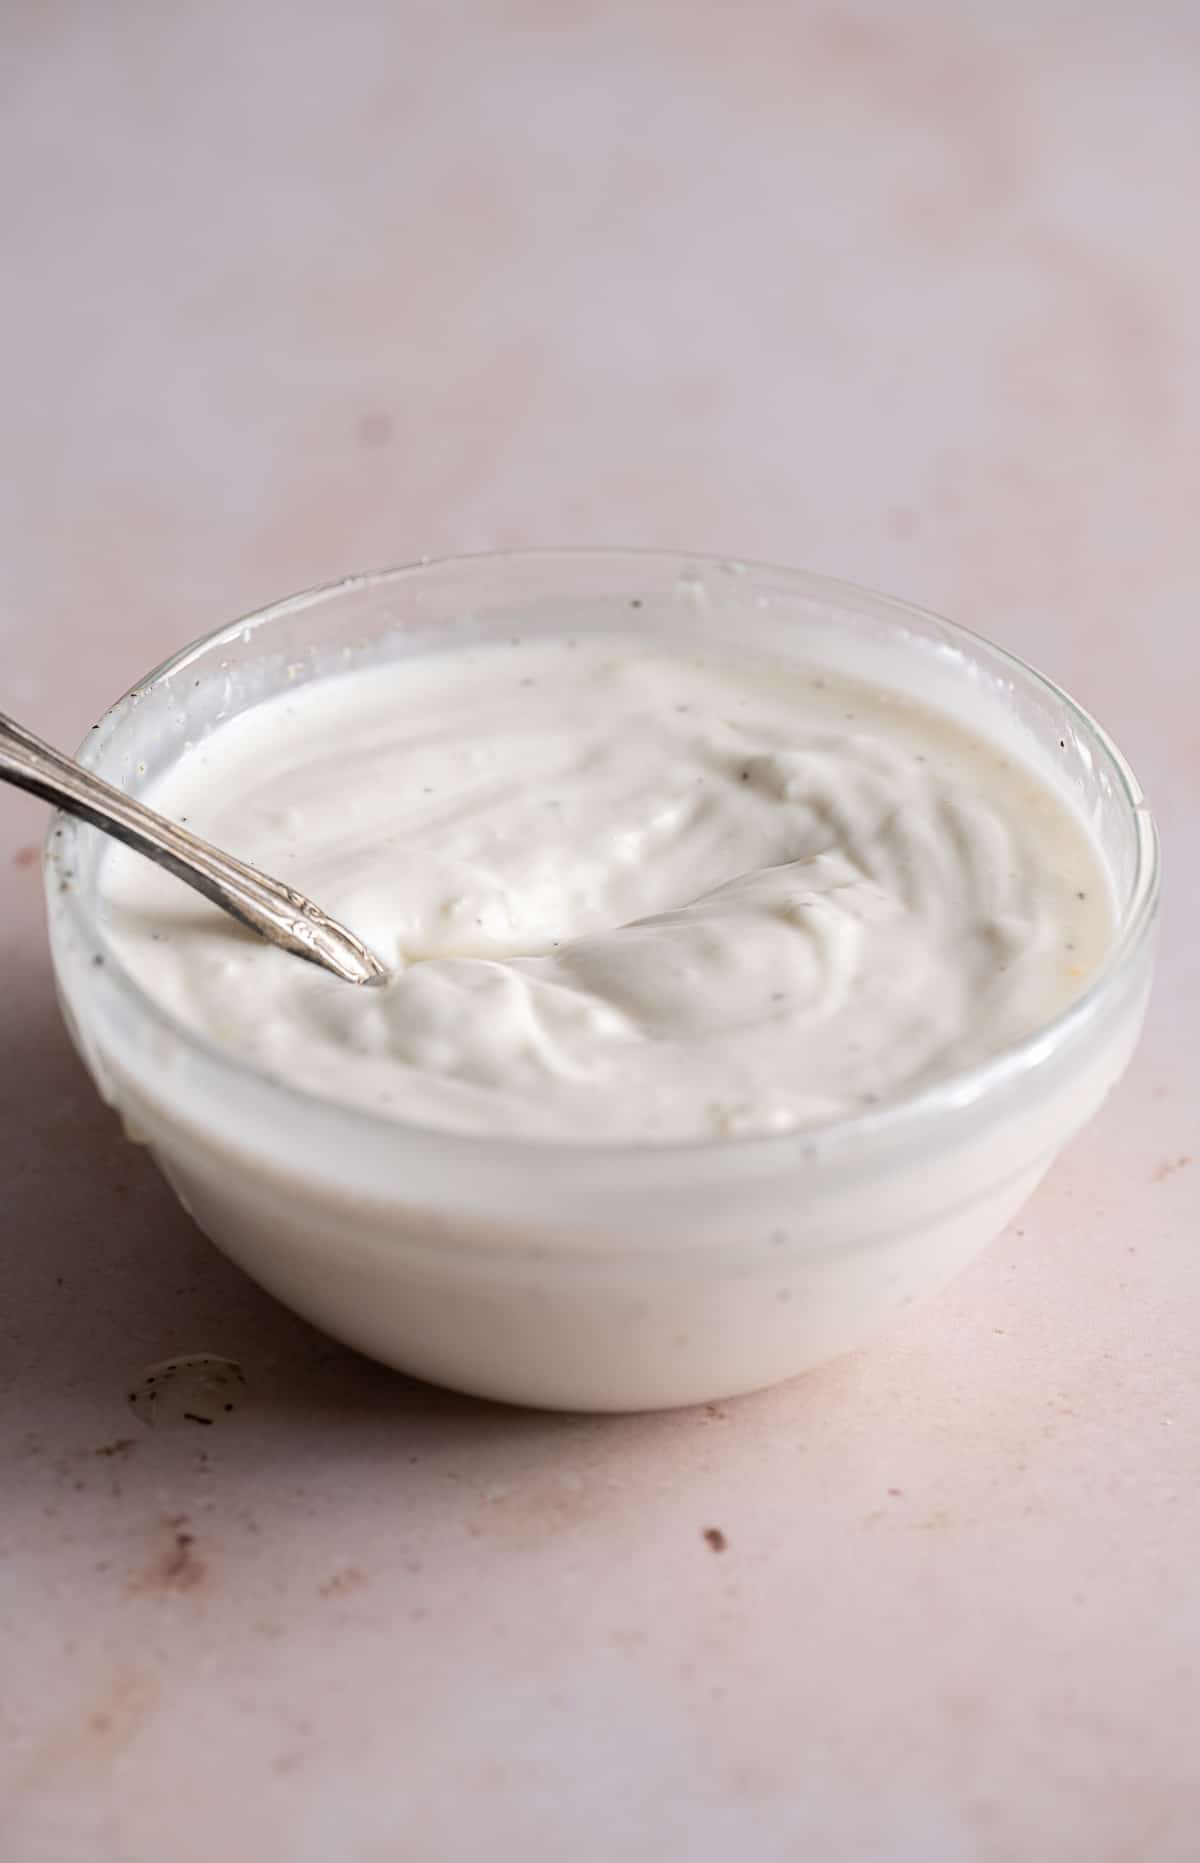 mixed aioli ingredients in a bowl.